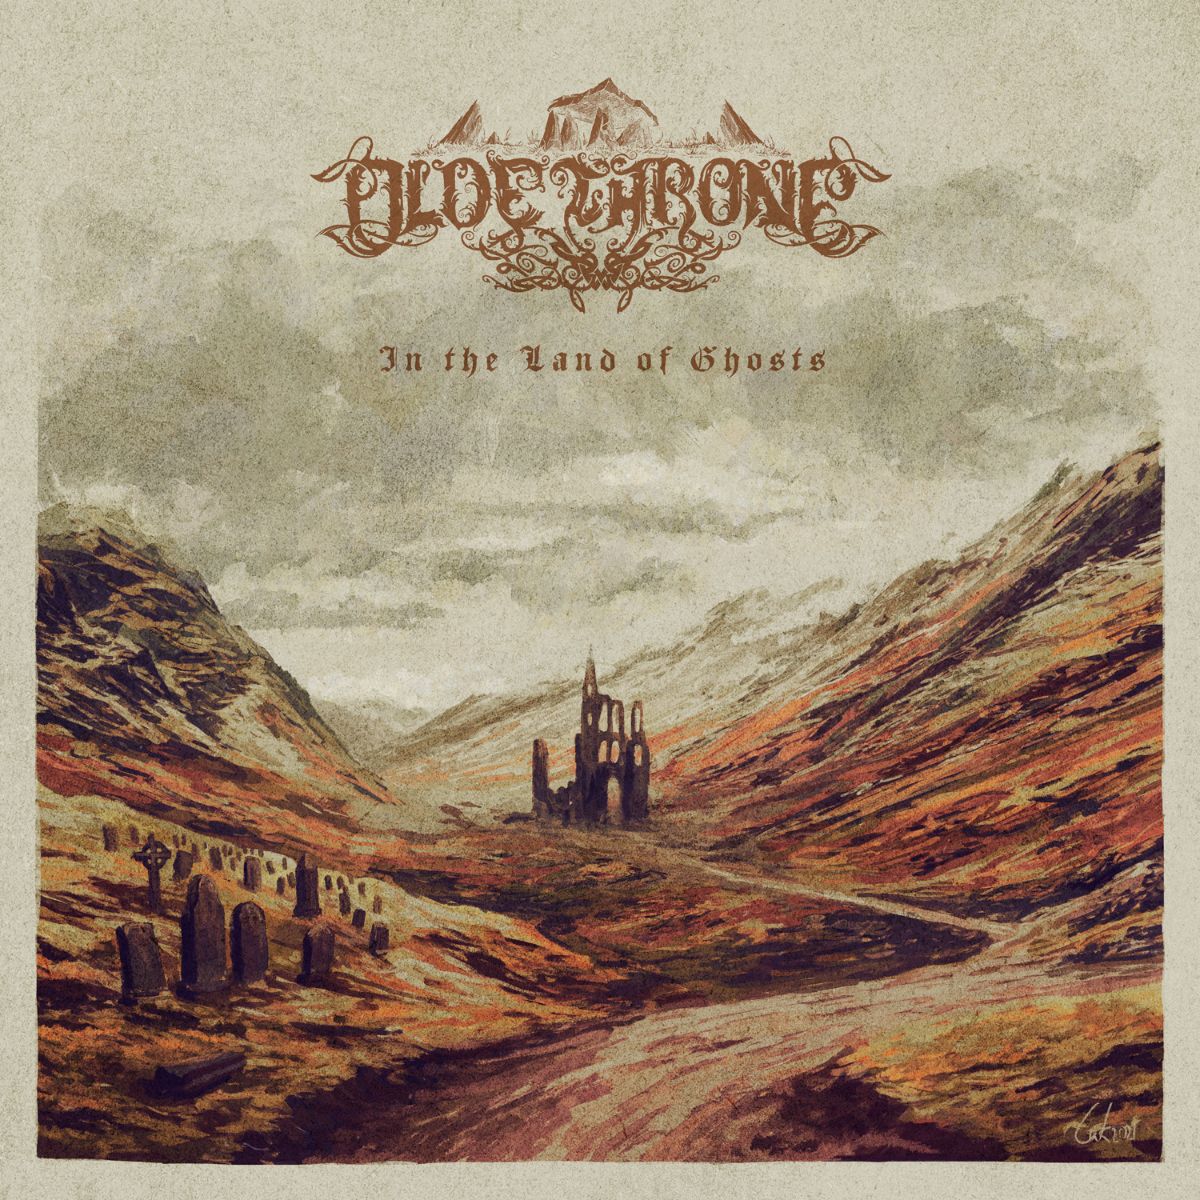 Olde Throne: New album 'In the Land of Ghosts' announcement, preorder & single: naturmacht.com/olde-throne-in… #oldethrone #inthelandofghosts #naturmachtproductions #blackmetal #melodicblackmetal #cd #tape #cassette